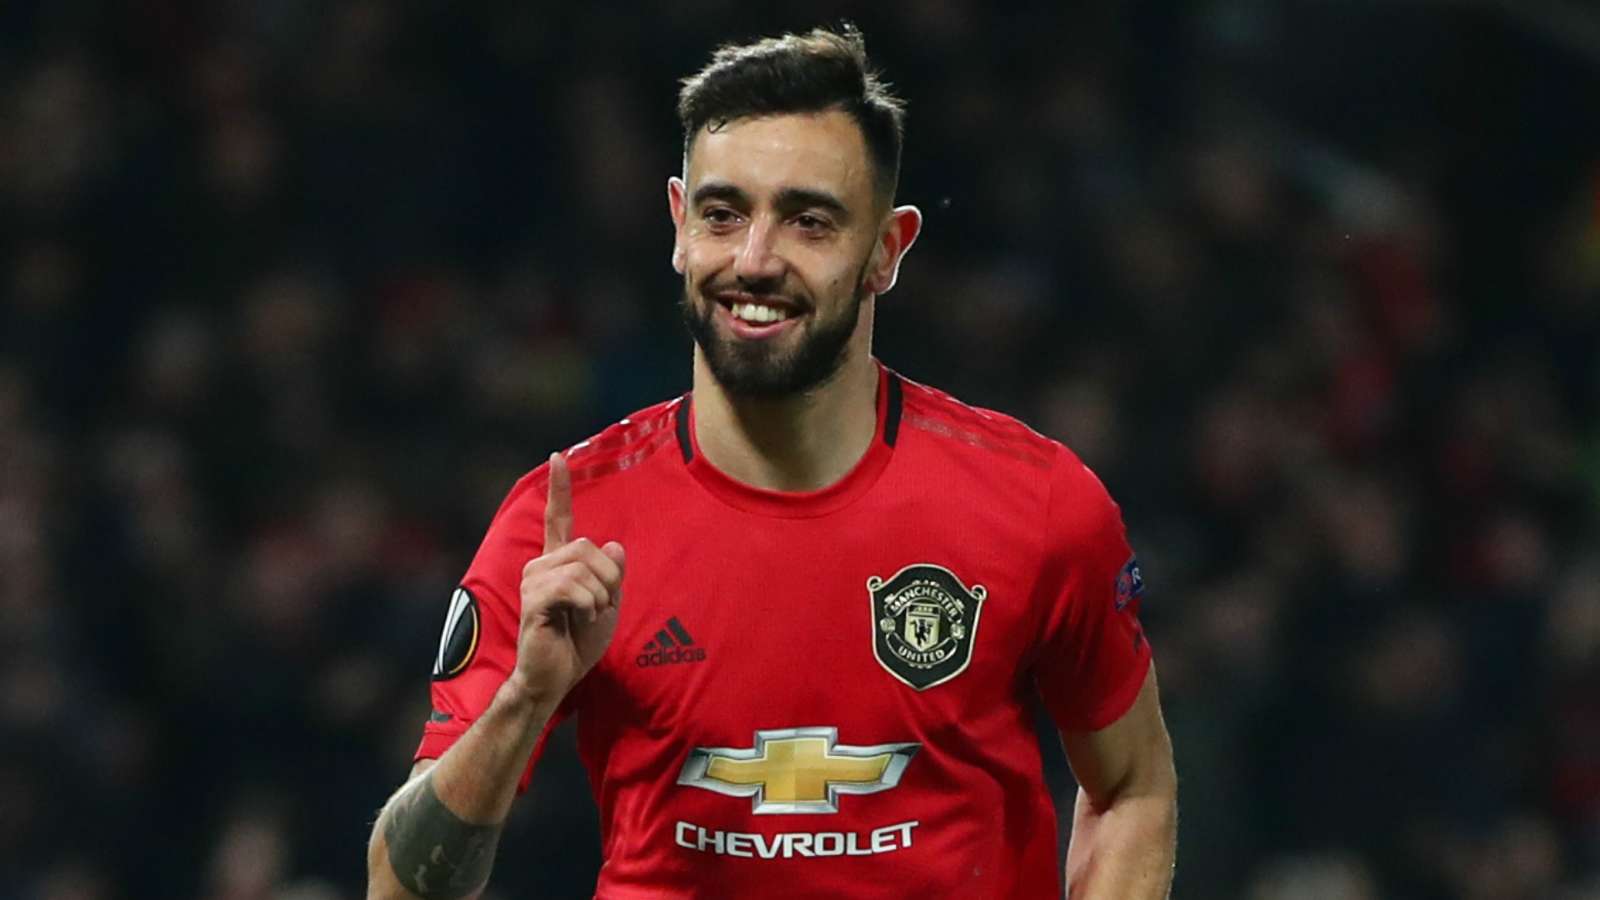 Fernandes has given Man Utd 'extra dimension' but they still need more quality to compete says Stam - Bóng Đá